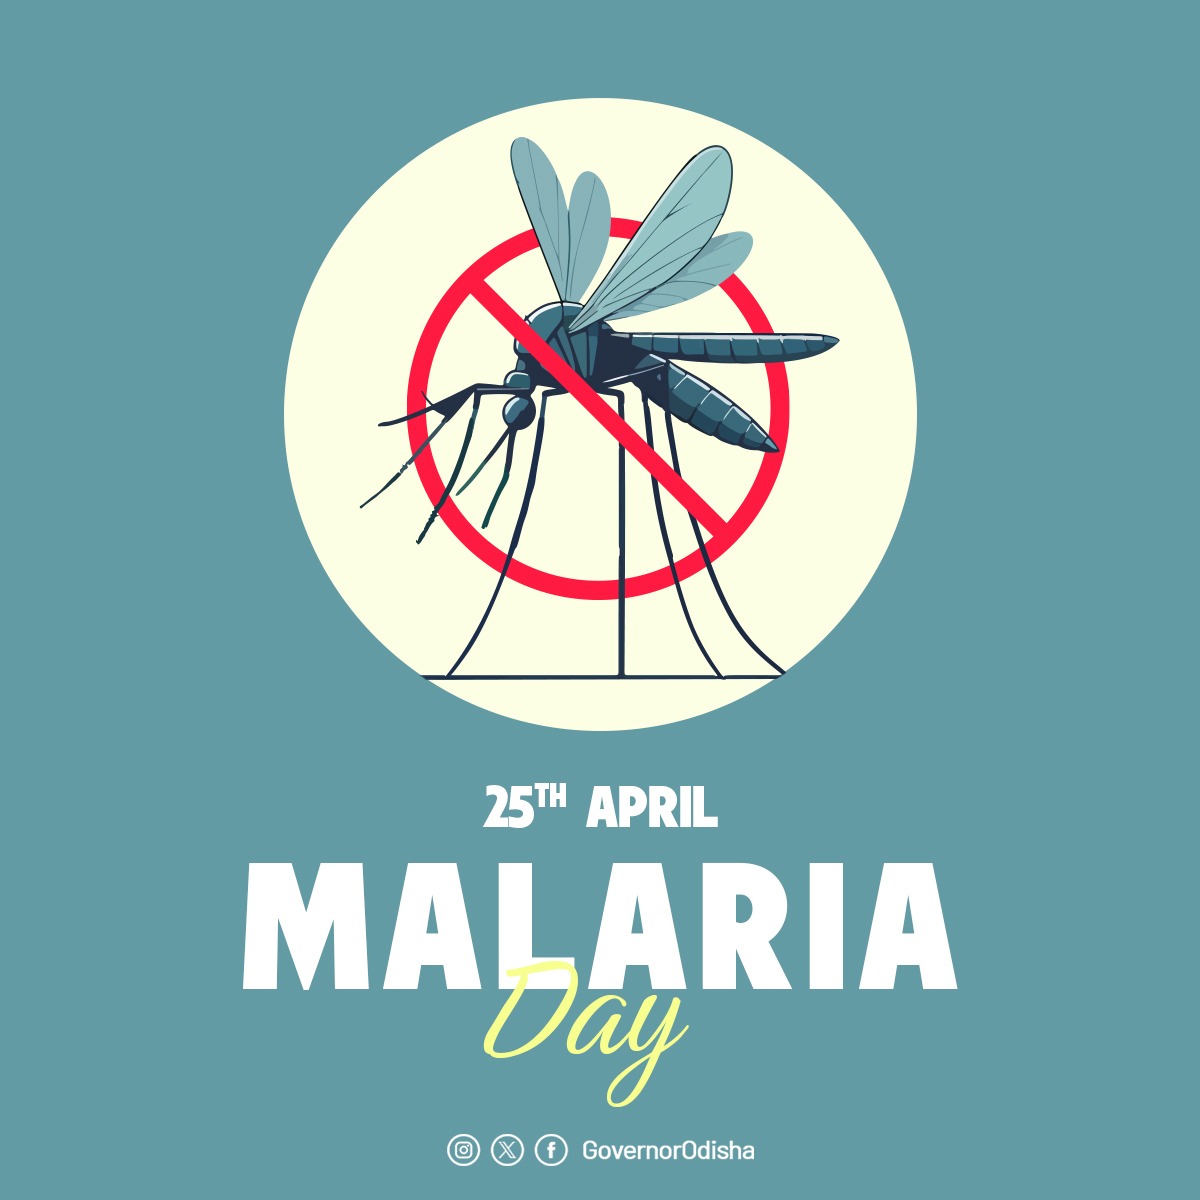 On #WorldMalariaDay, let's raise awareness about the ongoing battle against malaria. With continued investment in prevention, treatment, and research, we can make strides toward a malaria-free world. 'Accelerating the fight against Malaria for a more equitable world”.